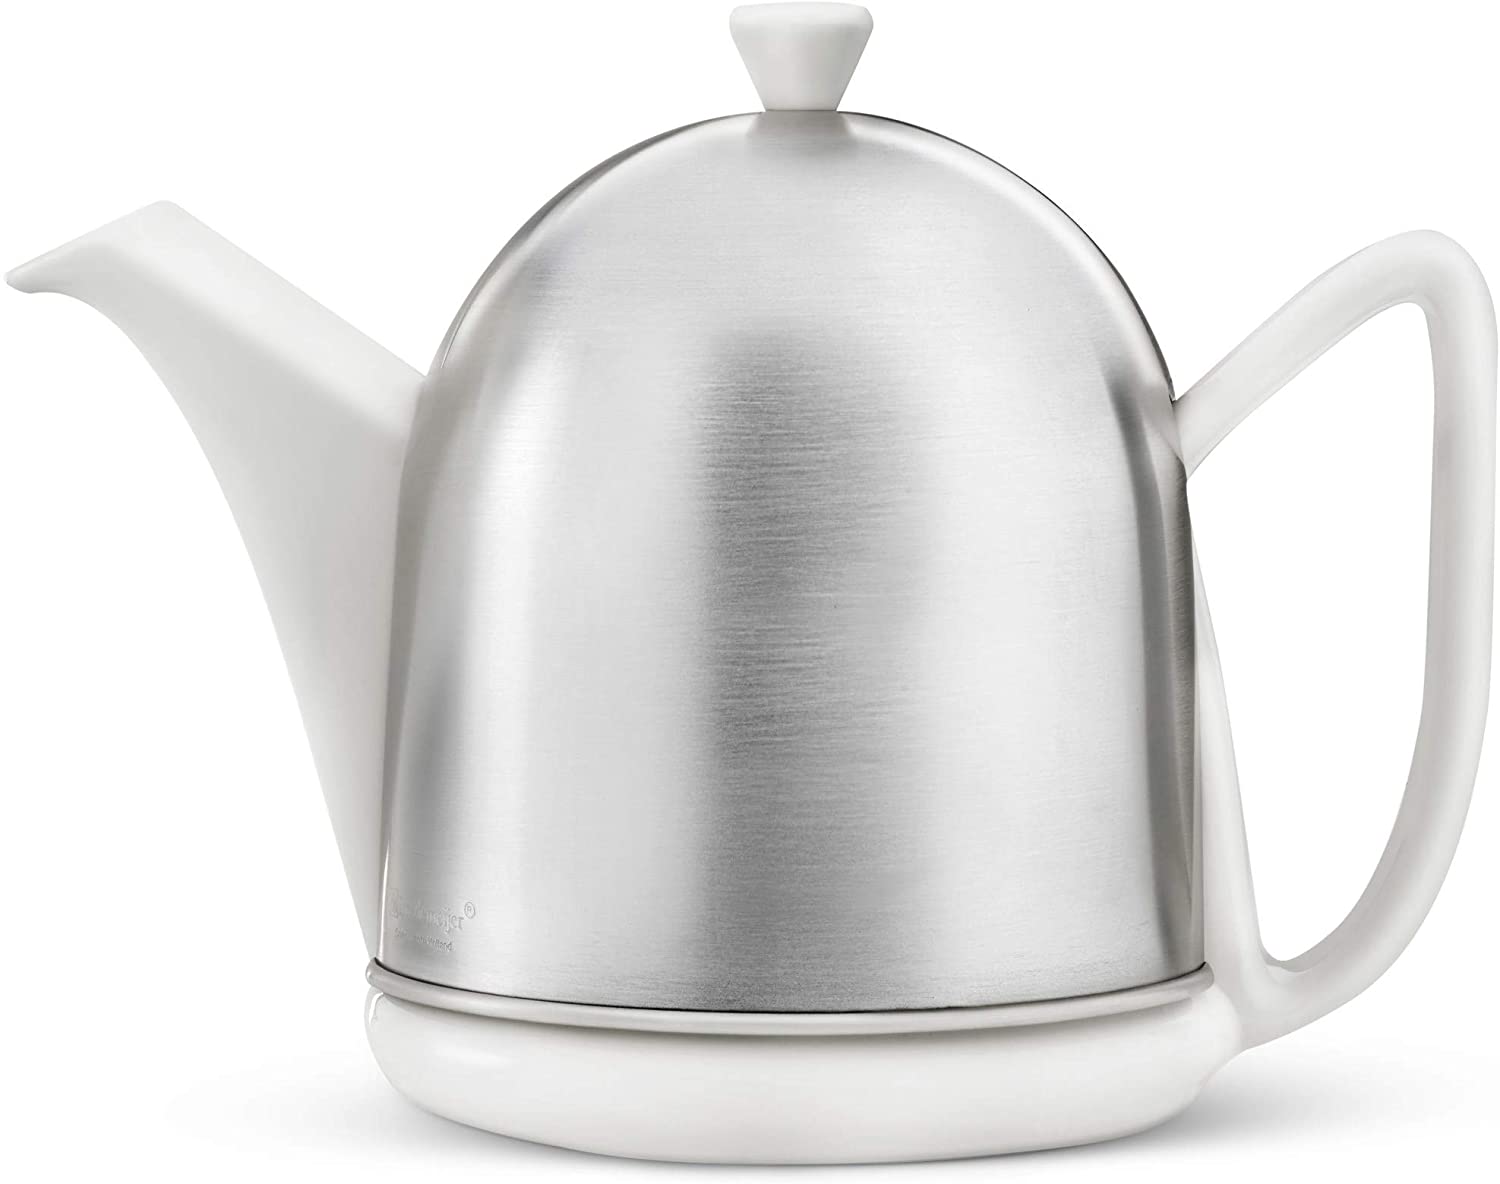 Bredemeijer Cosy Manto Teapot 3510 W – 1.0 L, Ceramic White with Insulated Shell by Amazon Source